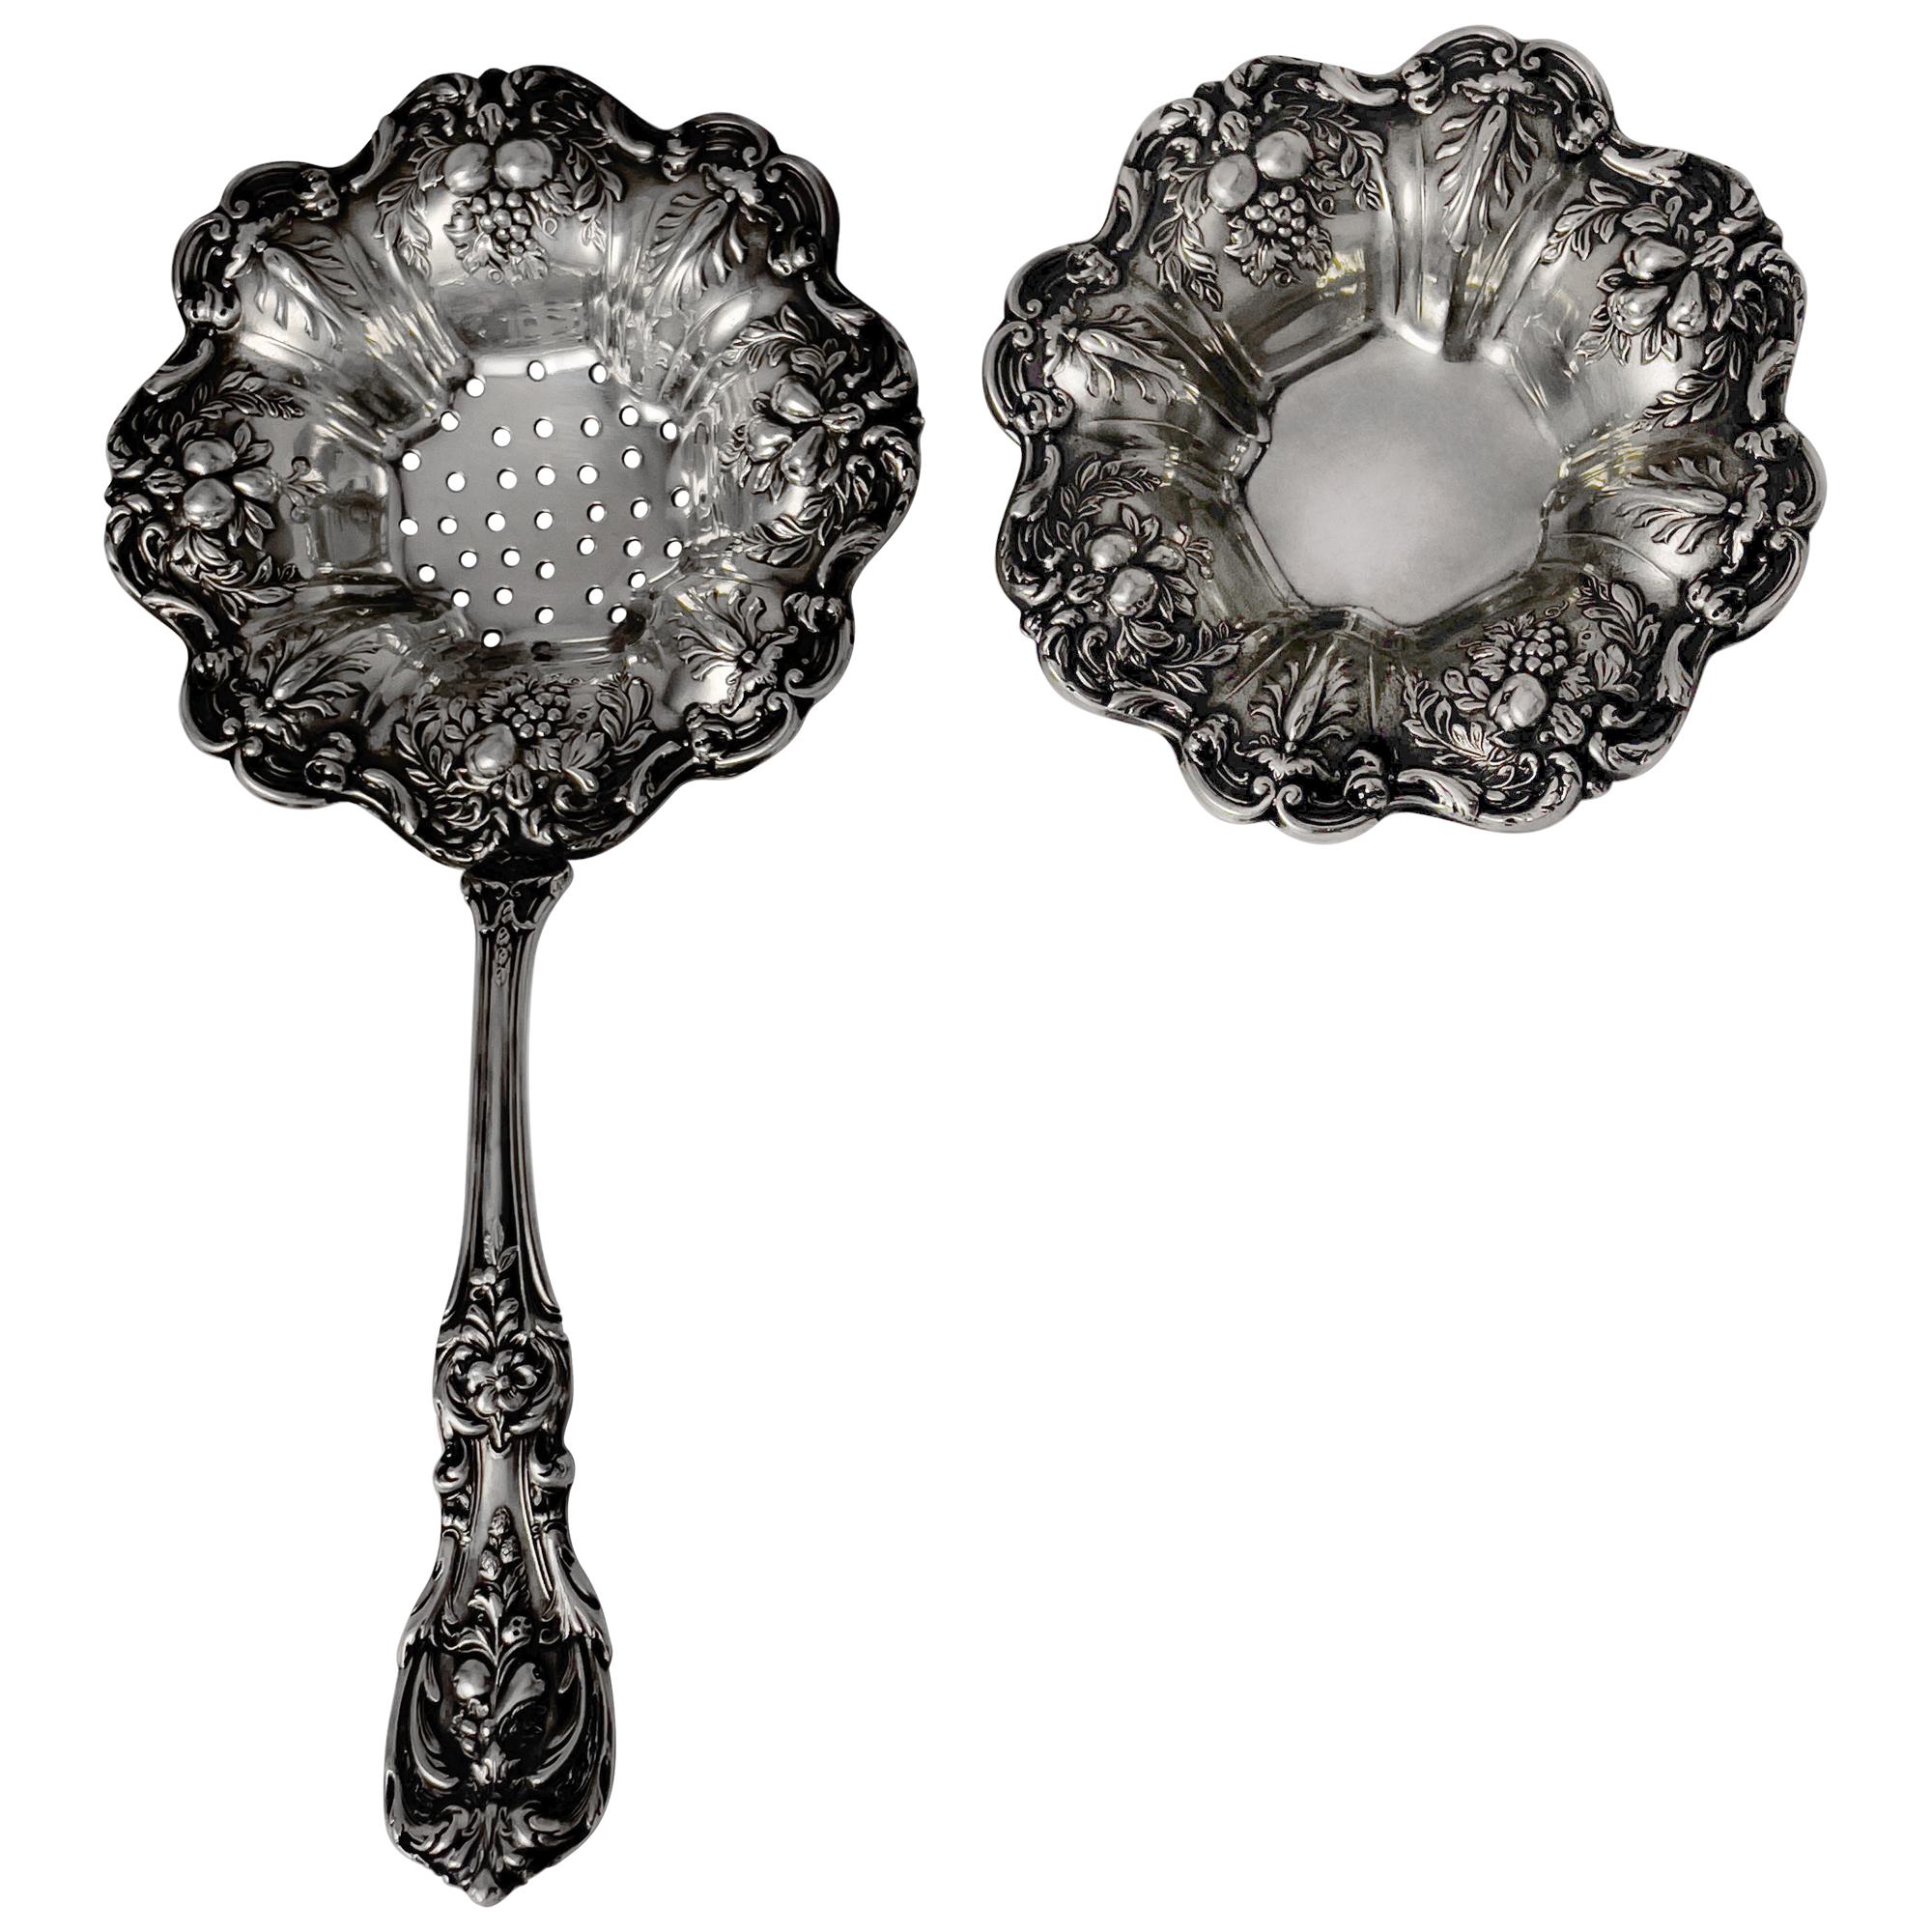 Sterling silver 3 pieces set- 1) Francis the First,patented in 1907 by Reed & Barton: 1) Tea strainer (7 1/4 long  x  3 1/2